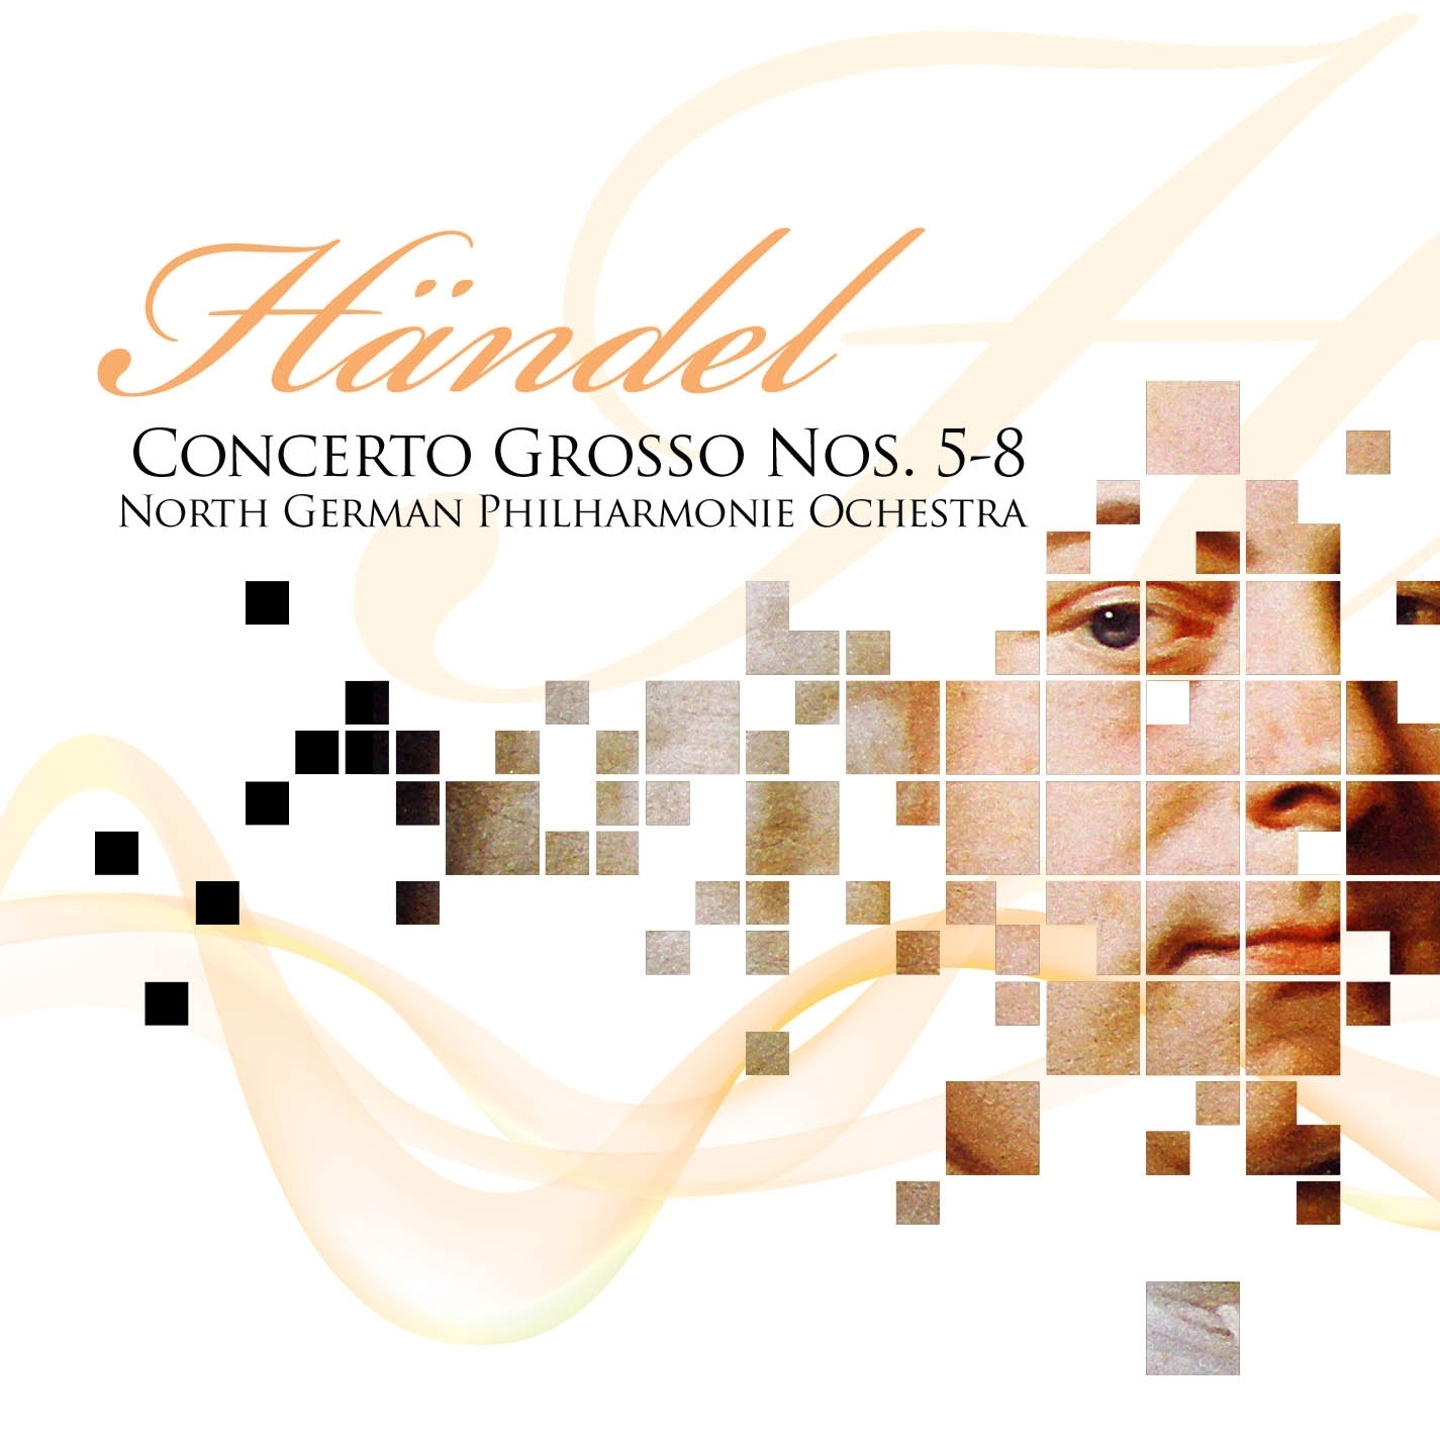 Concerto Grosso No. 6, in G Minor, Op. 6 : Musette: larghetto